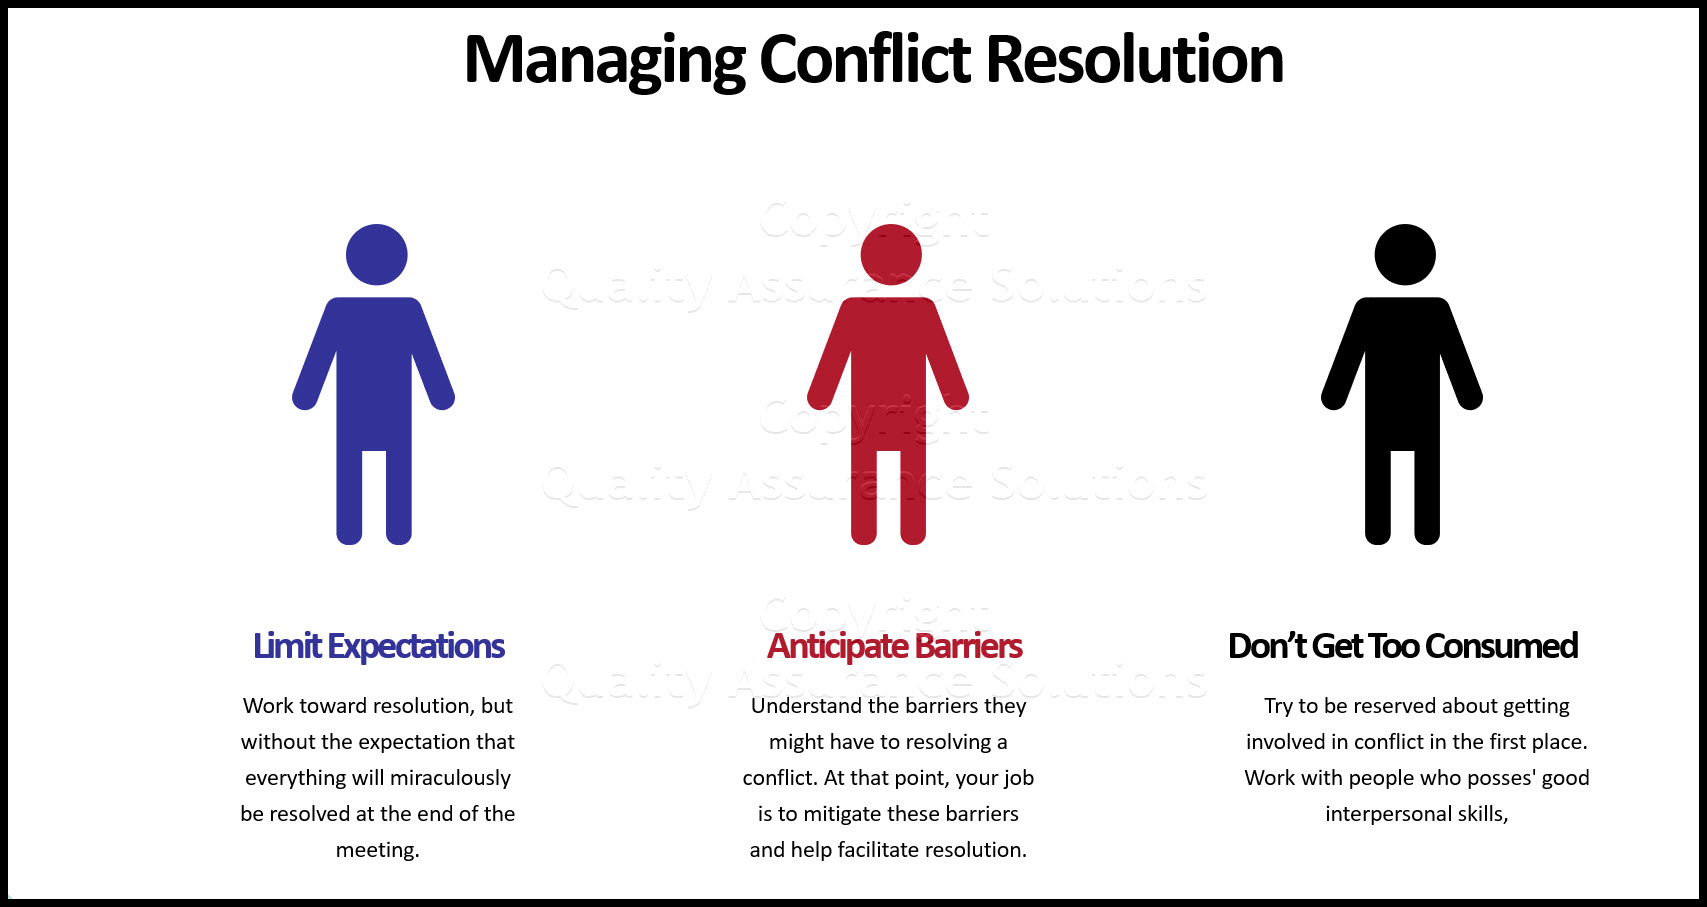 Learn conflict resolution strategies that work.  Effective conflict resolution is part of effective leadership and team building.